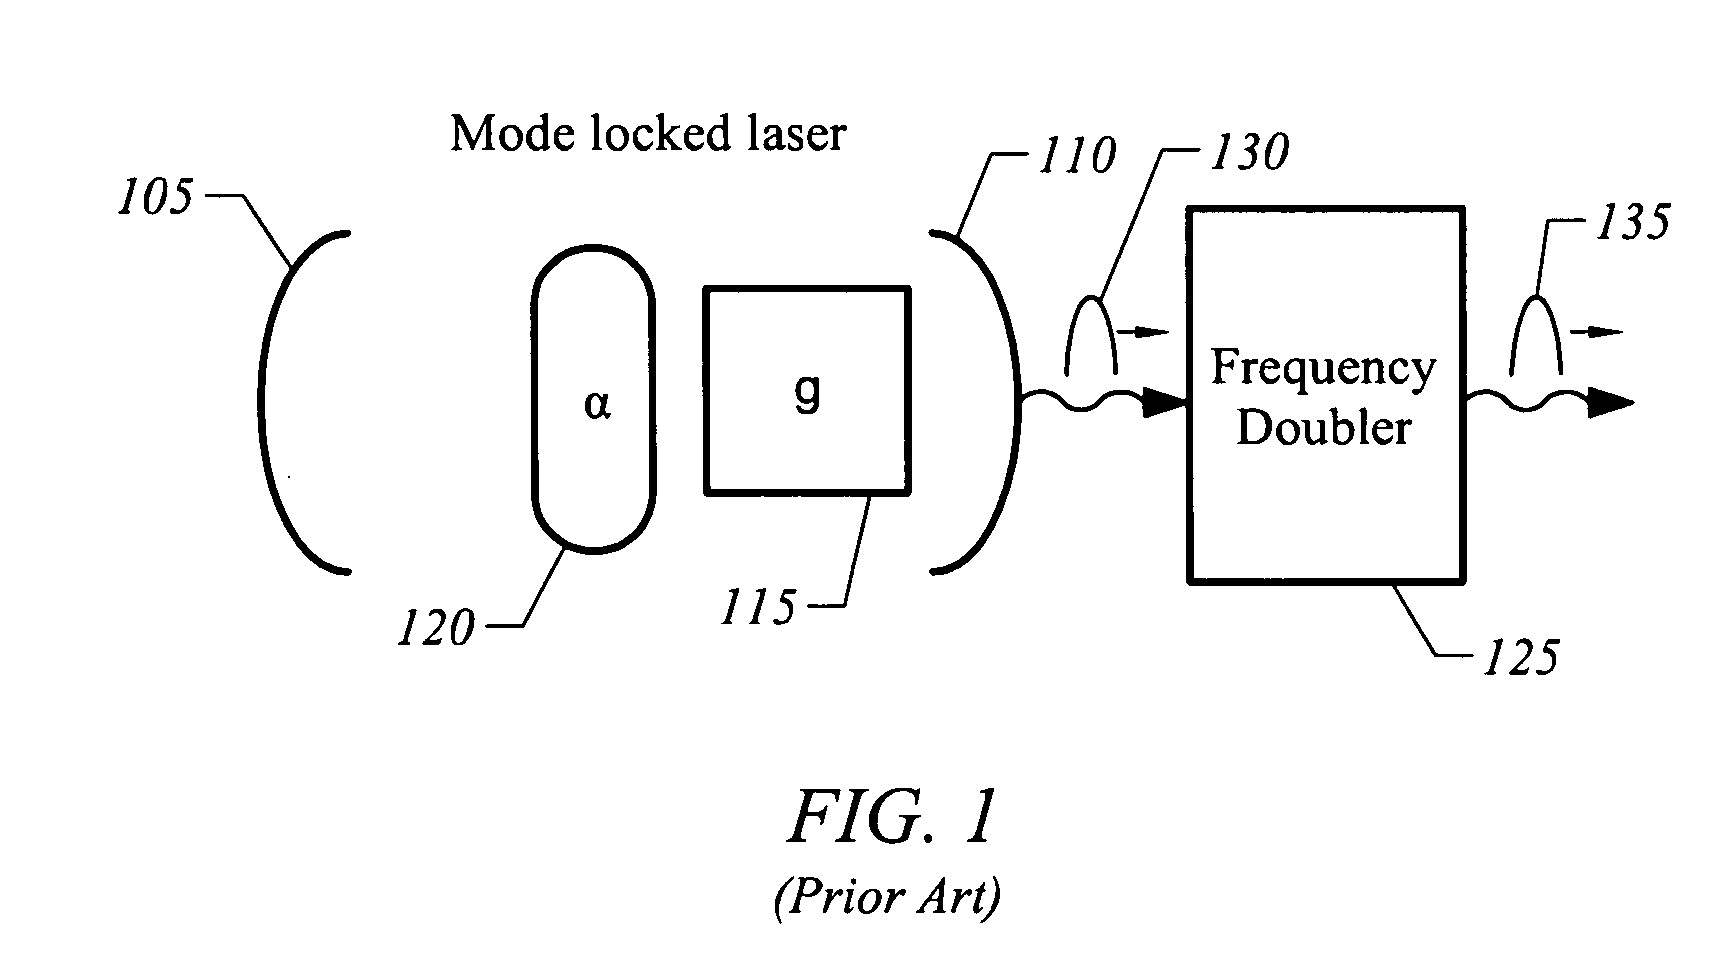 Apparatus, system, and method for wavelength conversion of mode-locked extended cavity surface emitting semiconductor lasers